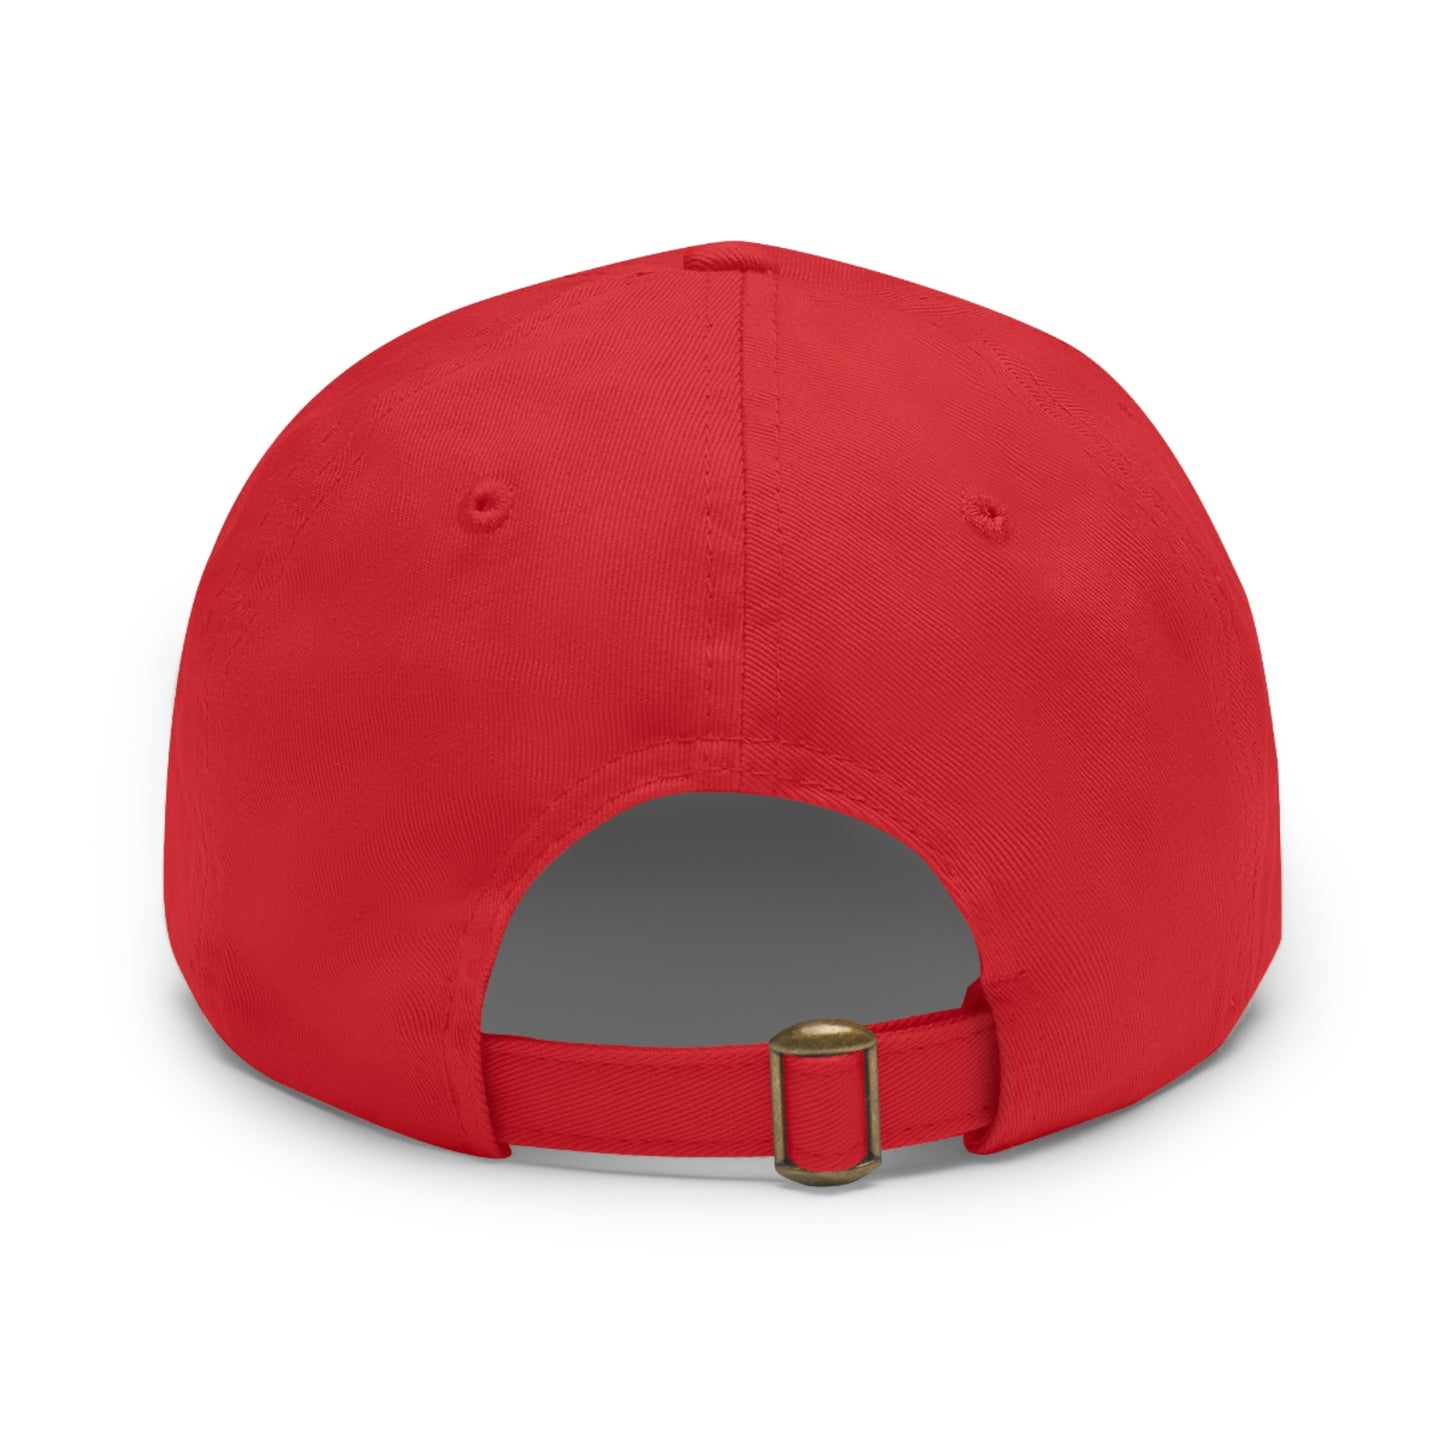 Bitcoin Ekasi Hat with Leather Patch (Round)